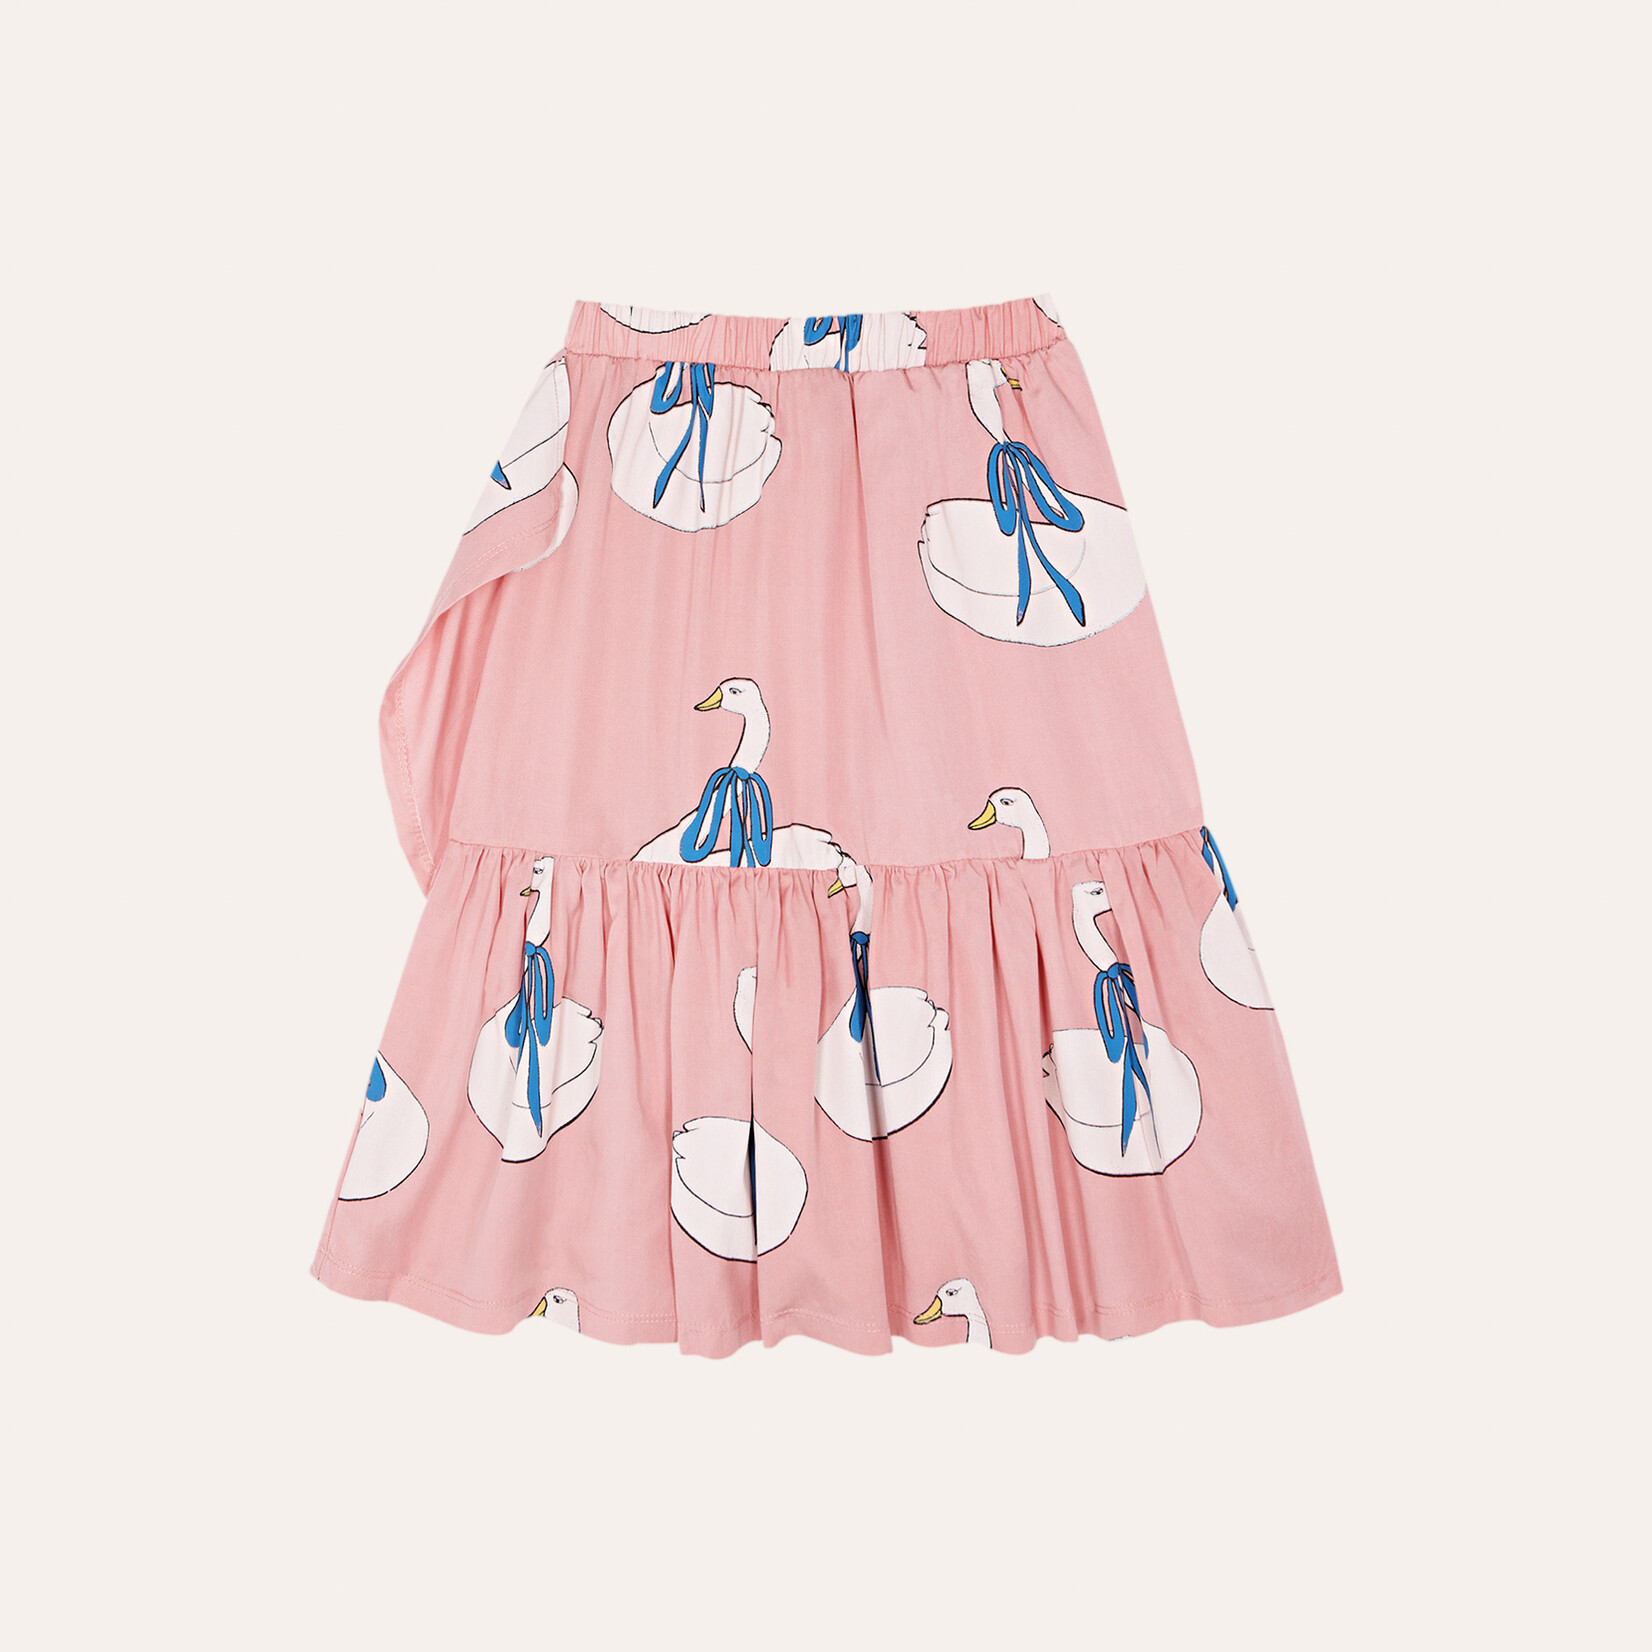 The Campamento SWANS ALLOVER PINK KIDS SKIRT